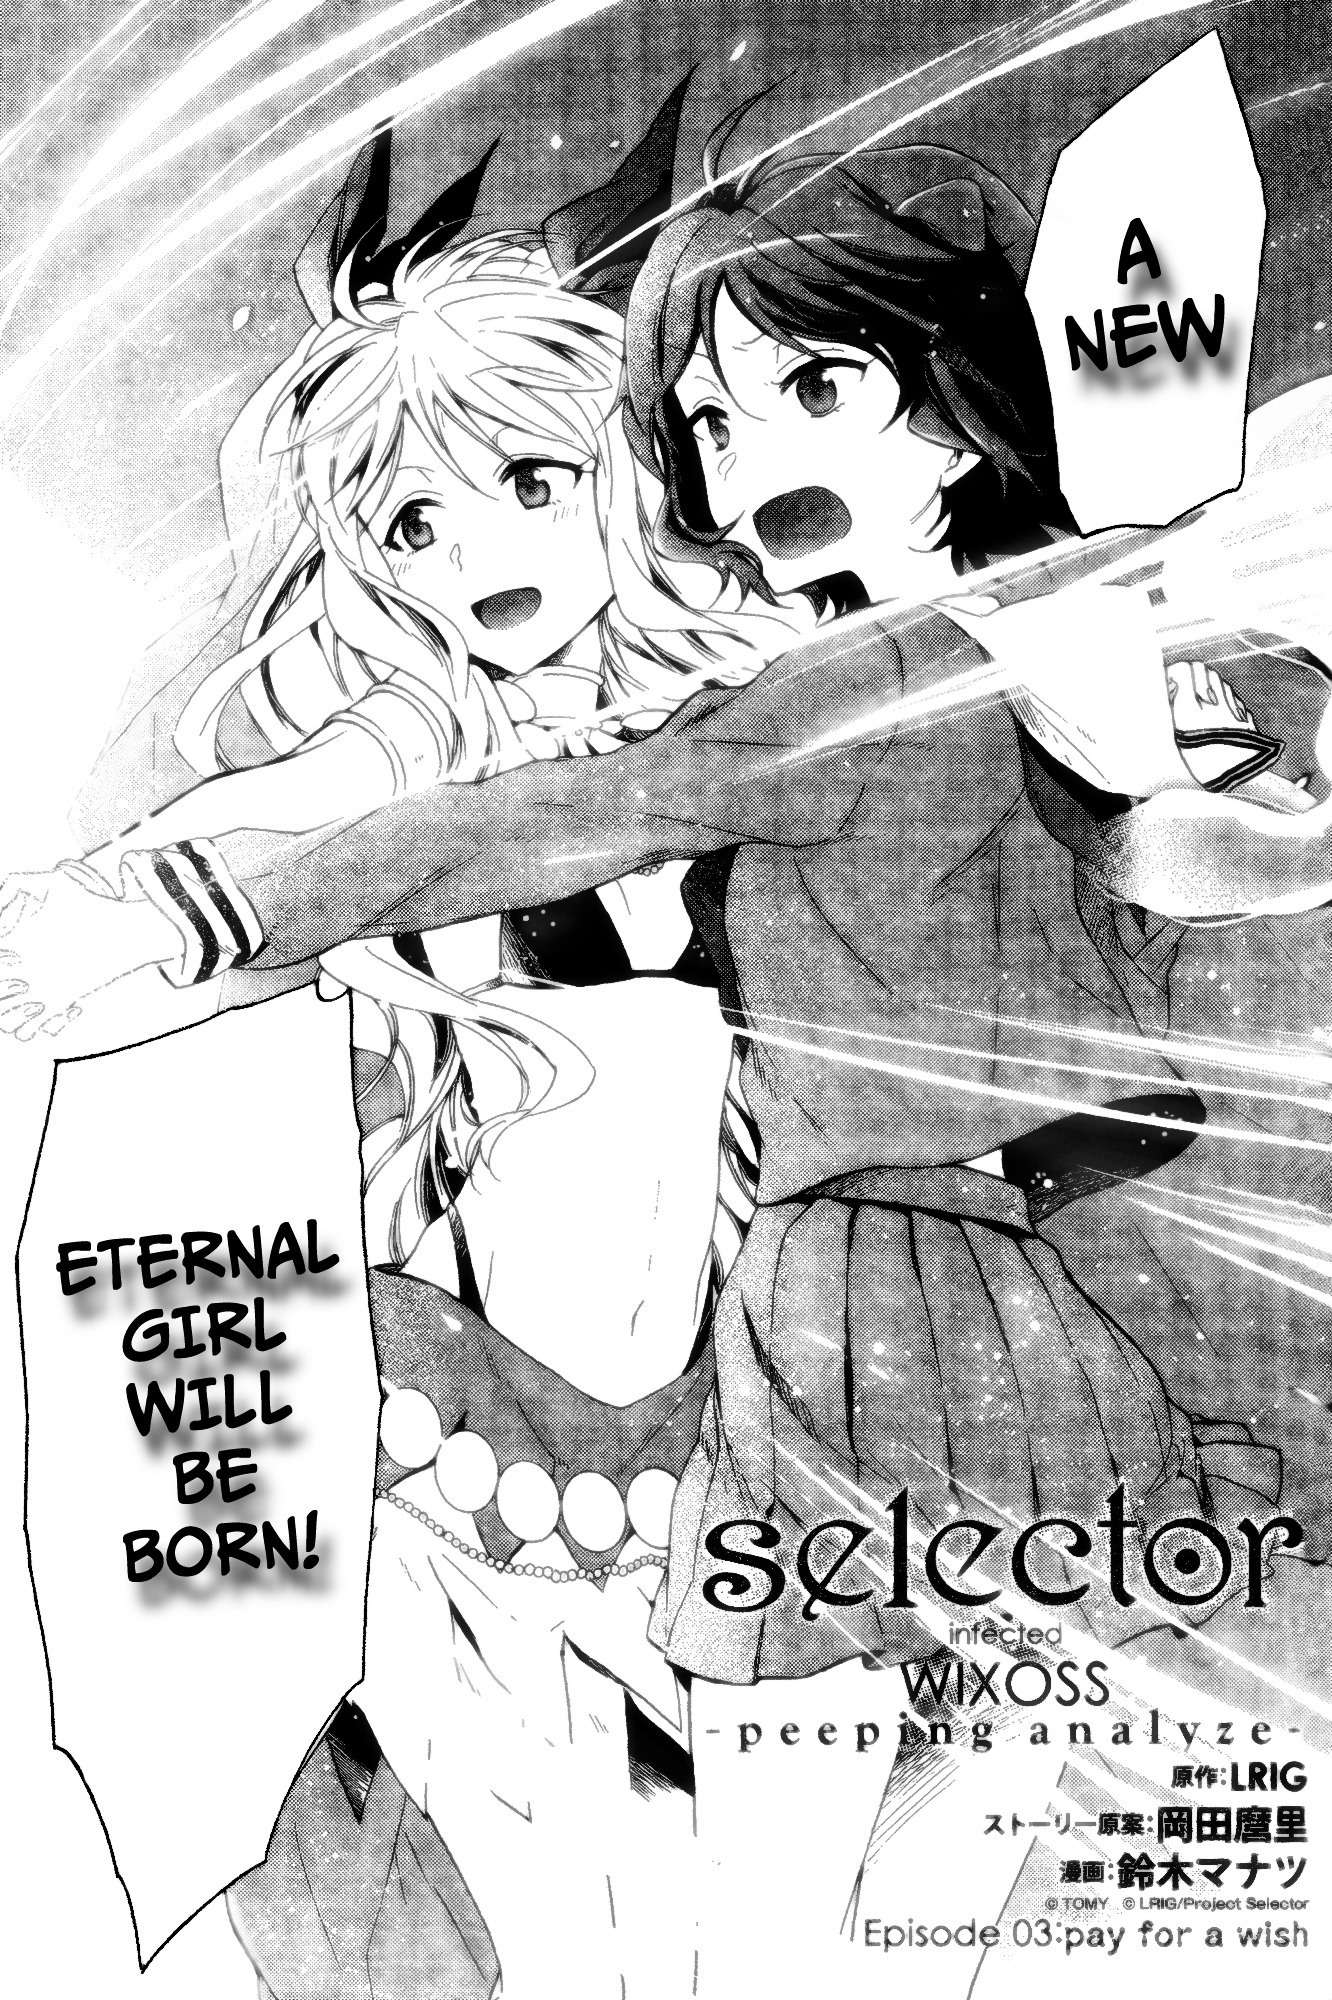 Selector Infected Wixoss - Peeping Analyze Chapter 3 #3